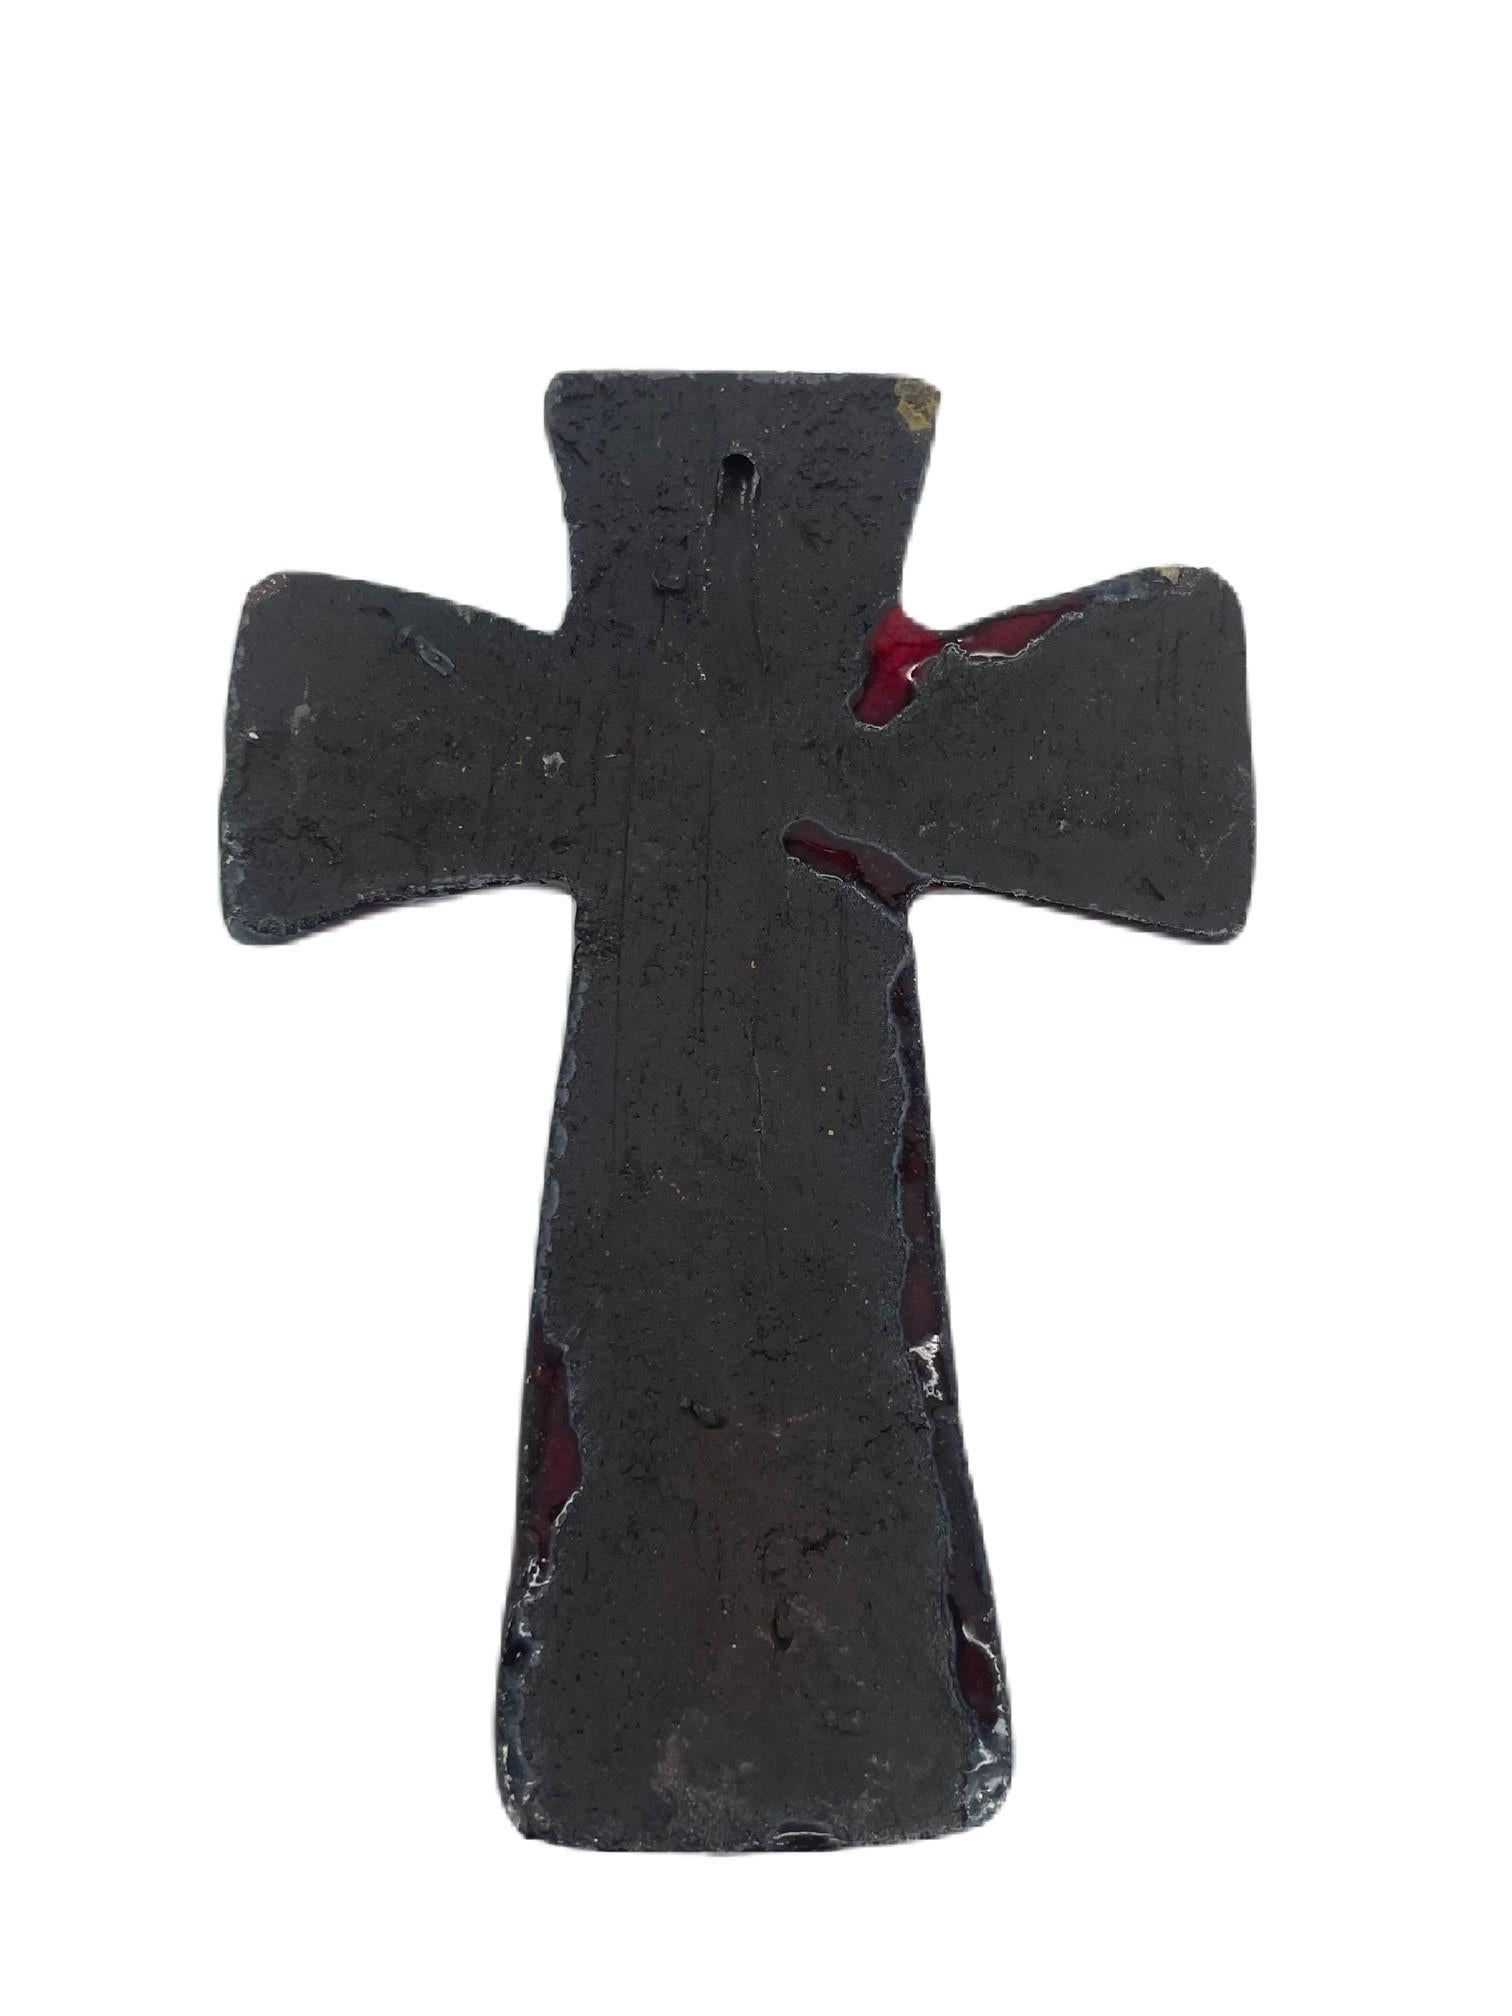 Hand-Carved Crucifix in Red, Black and Grey, Wall Hanging. 1970s Ceramic Cross Fat Lava For Sale